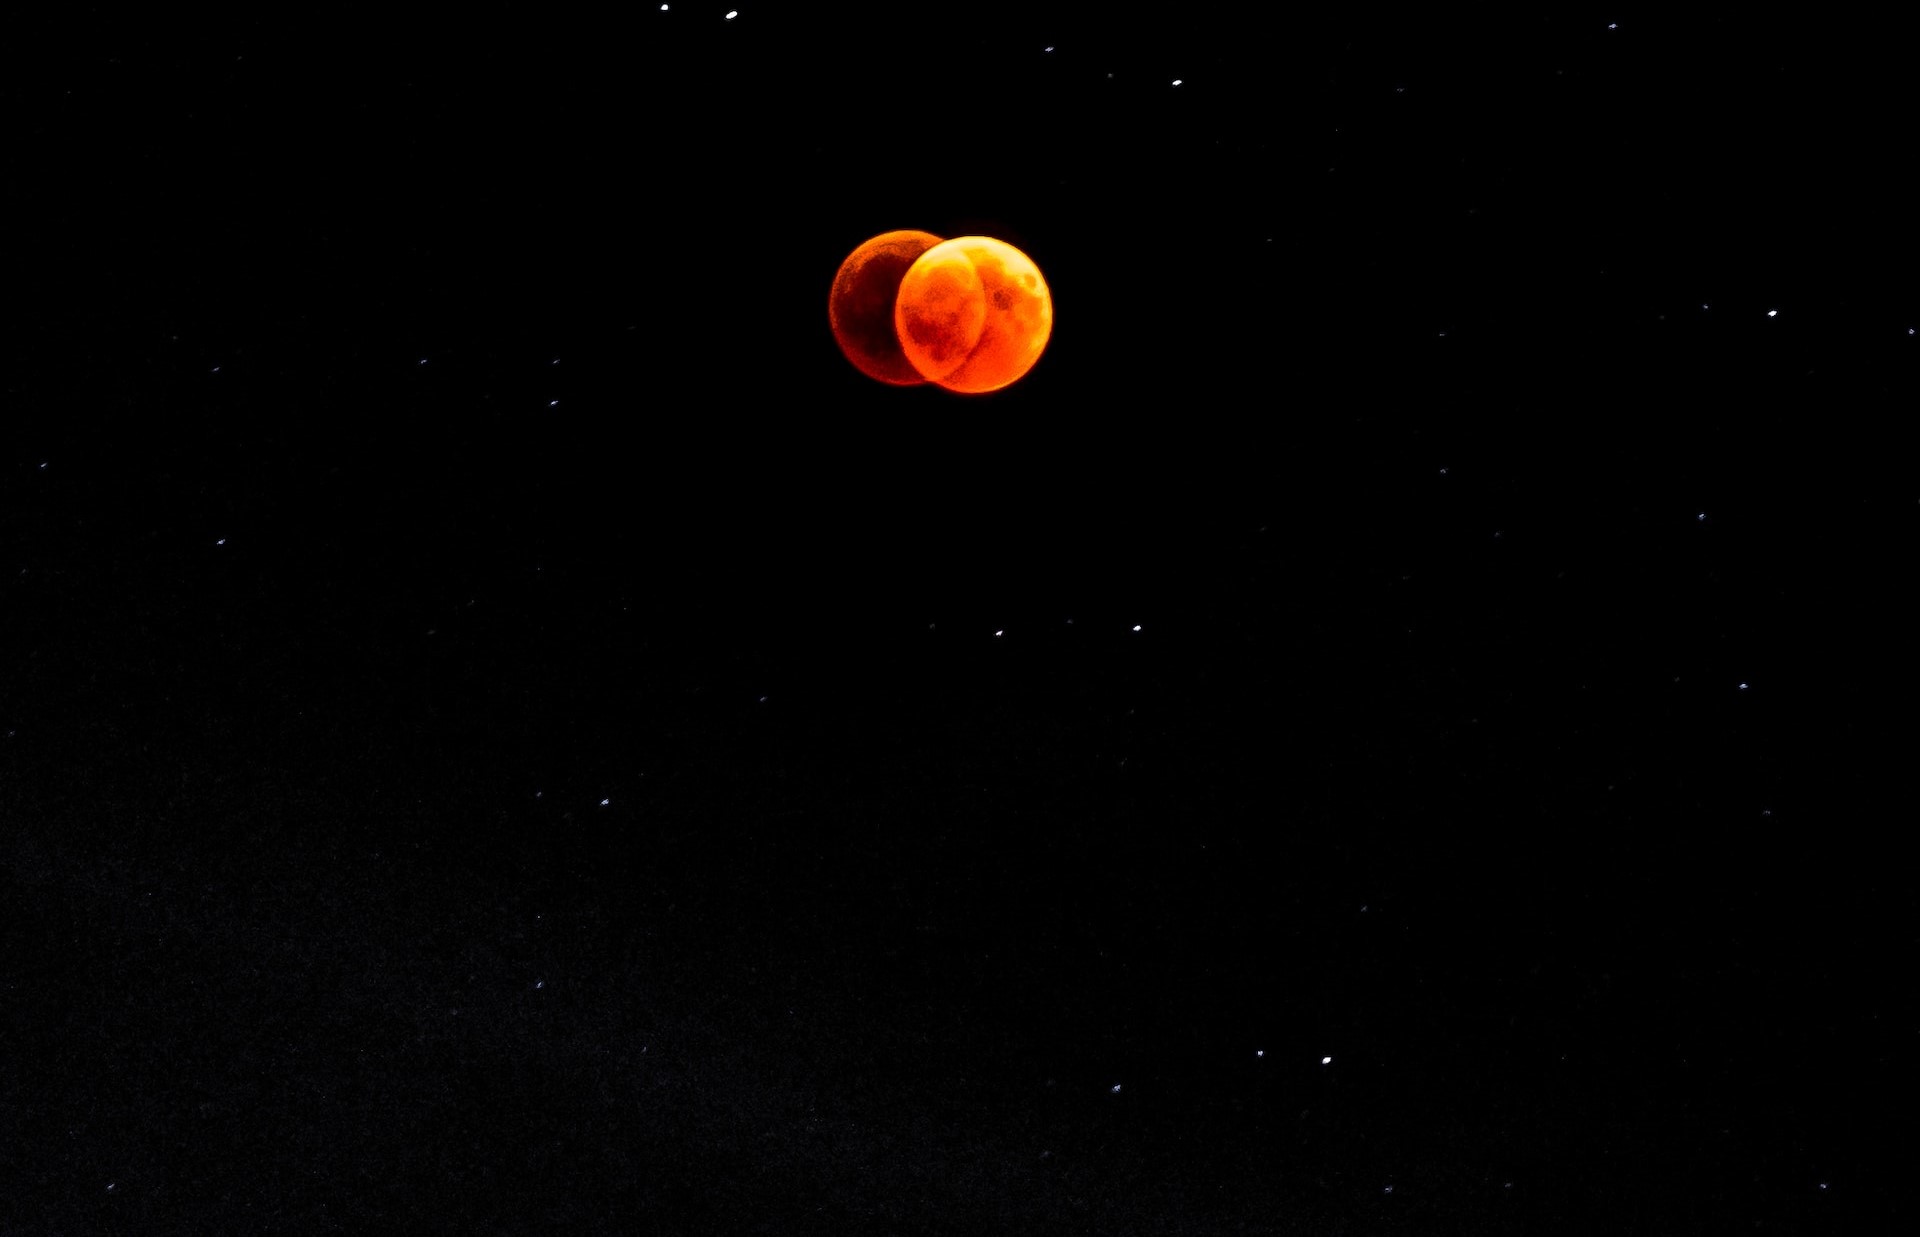 A night snapshot of a 2018 ‘Blood Moon’ eclispe. Photo by Luca Iaconelli via Unsplash.